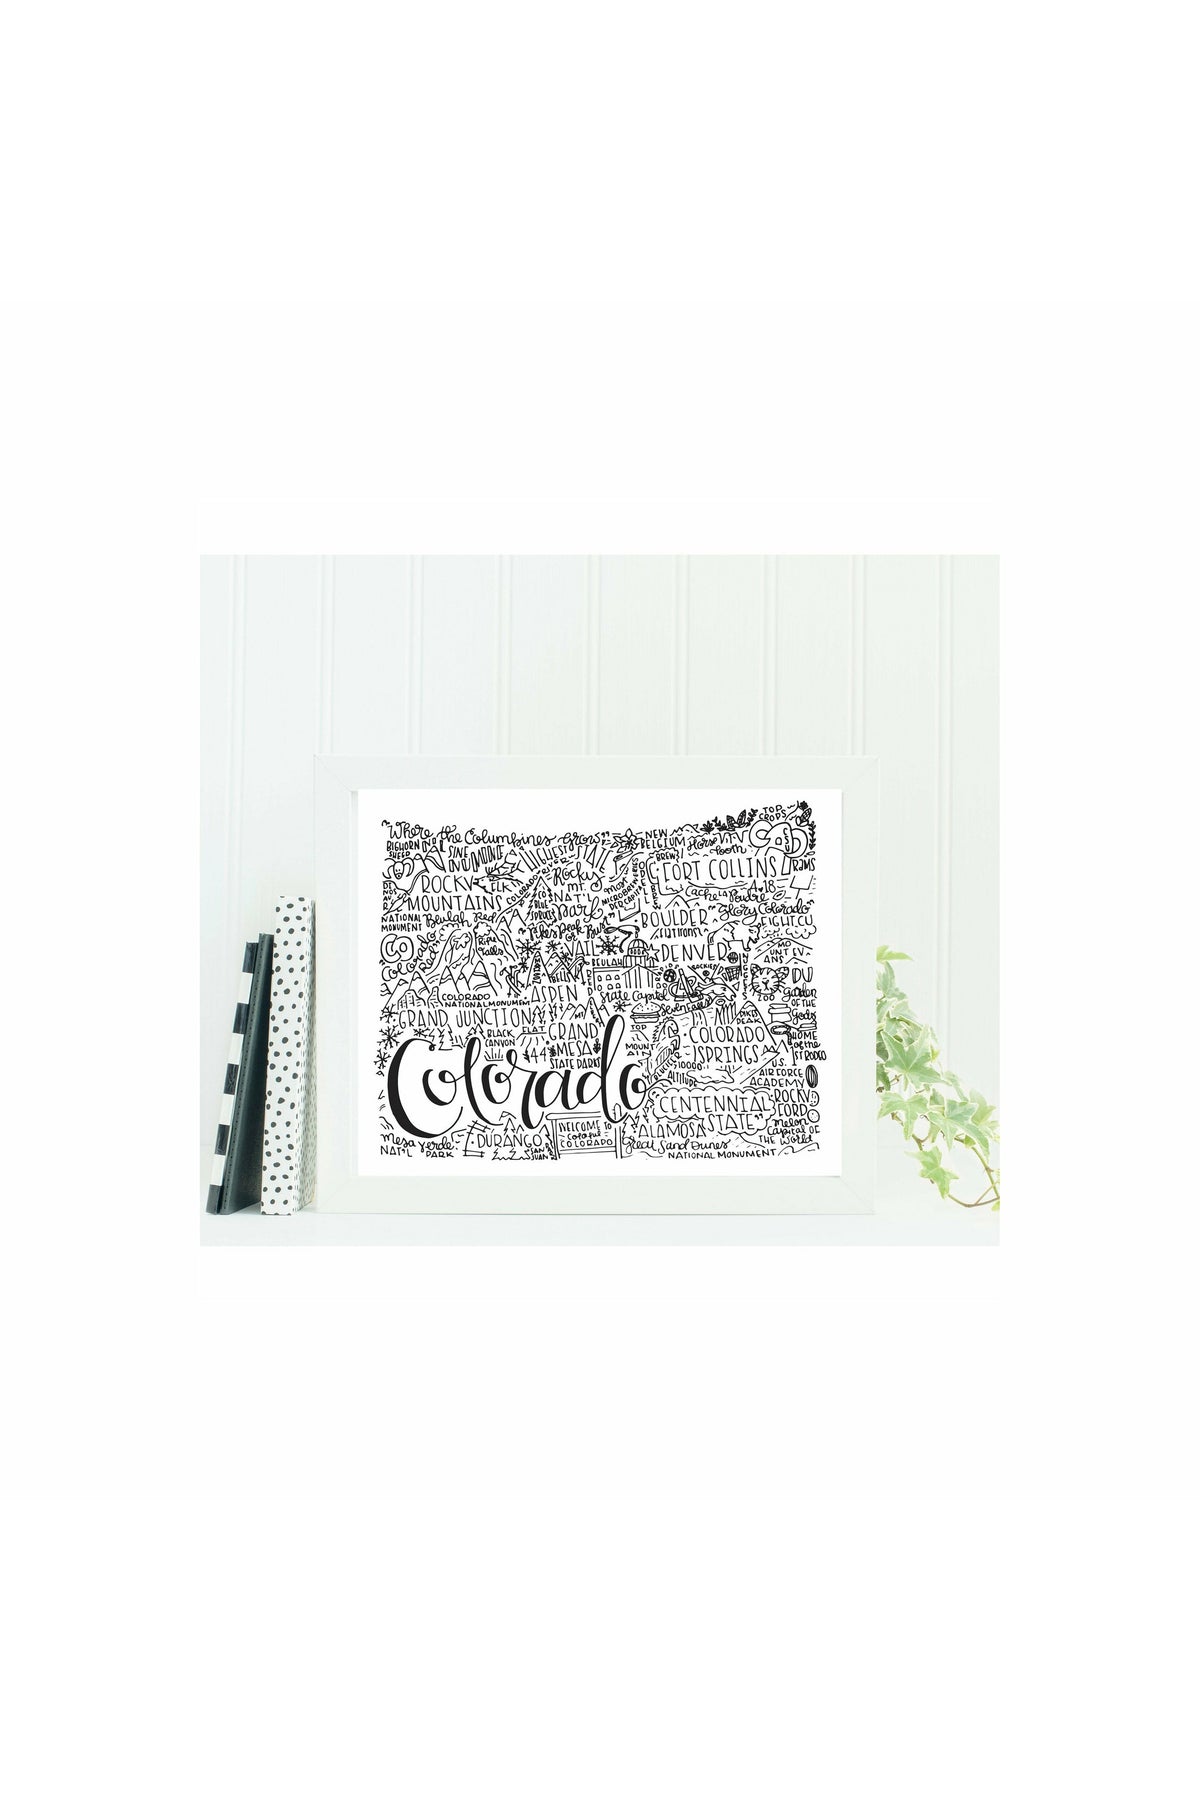 Colorado State Print-Hand Lettered State Print- Colorado State Gift-Prints-Wild & Precious